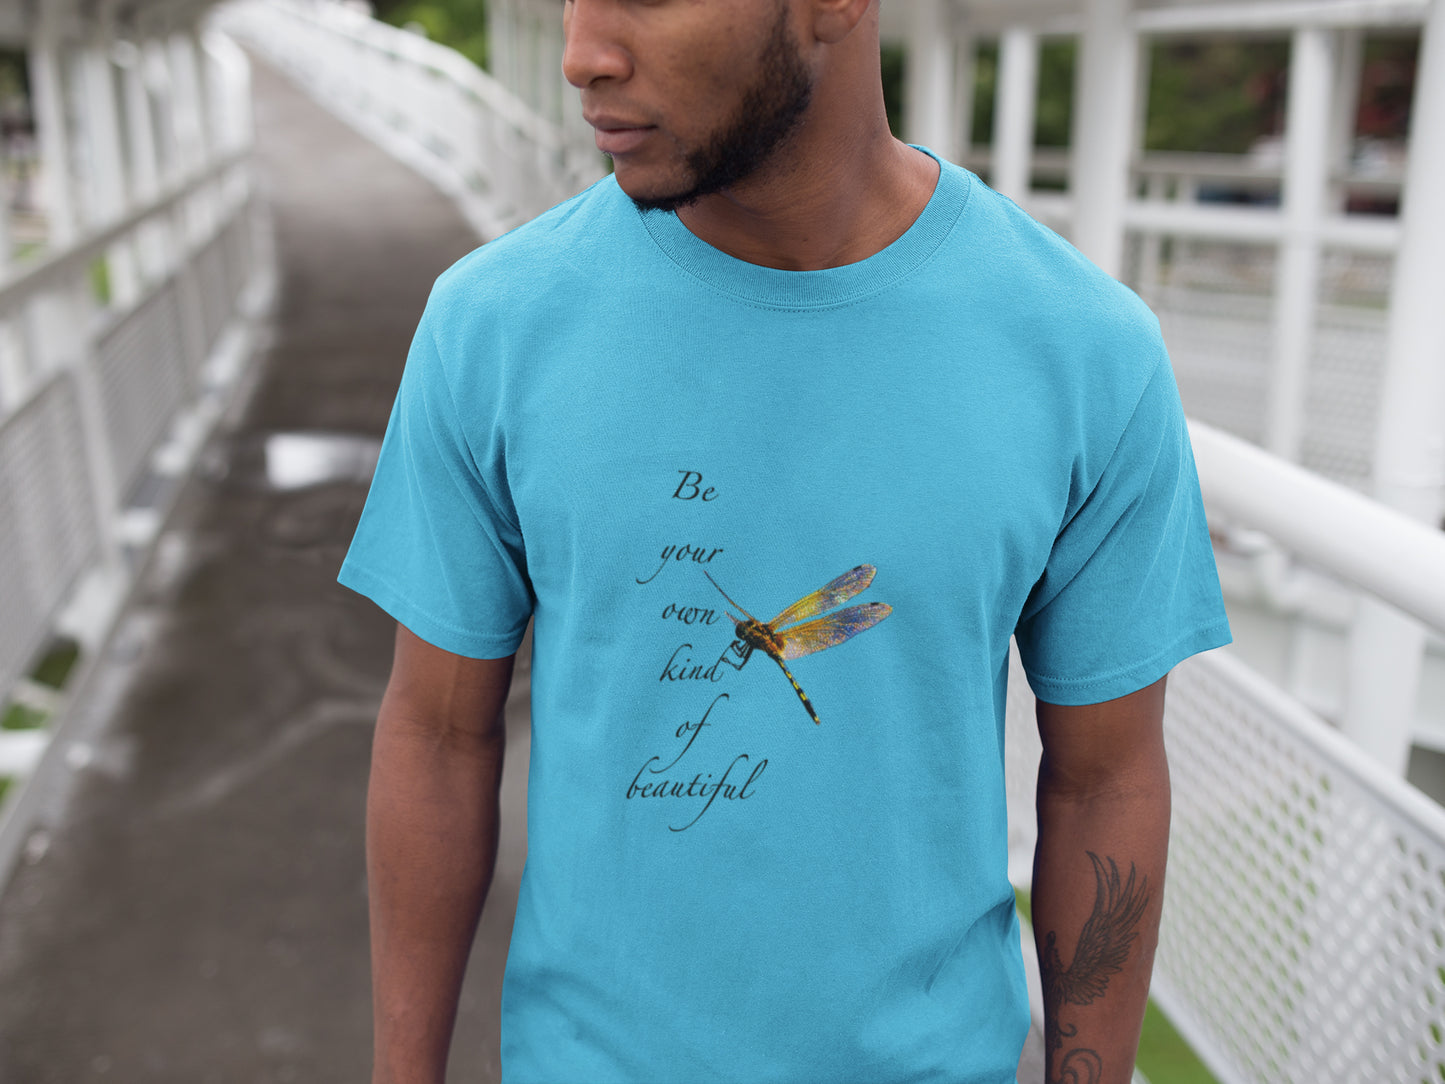 Summer T-shirt for Men( Your Own Kind Of Beautiful )